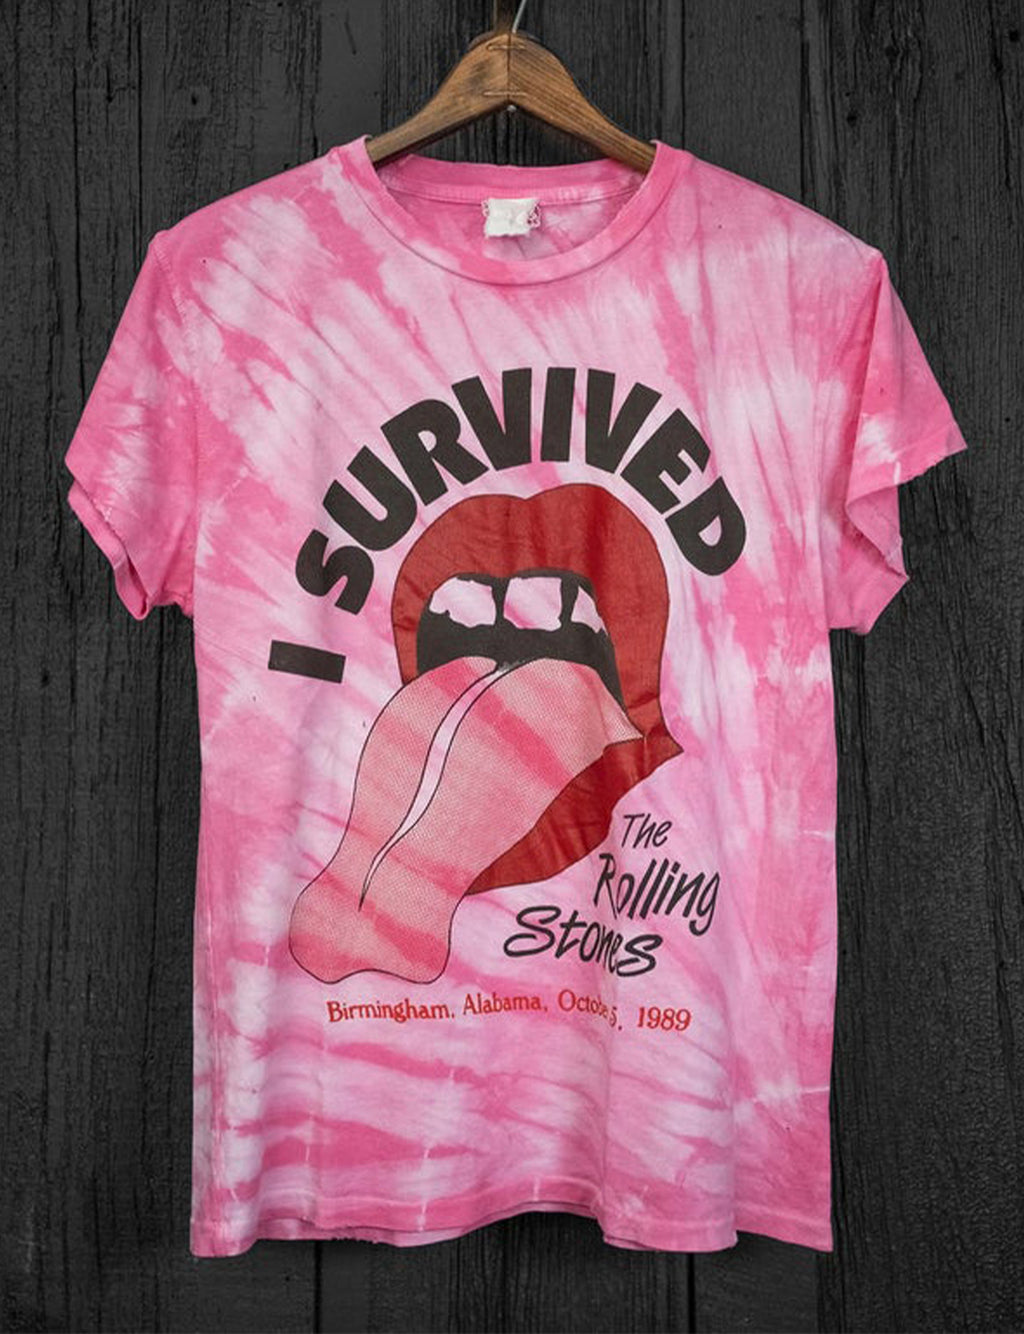 Survived The Rolling Stones Crew Tee in Pink Tie Dye